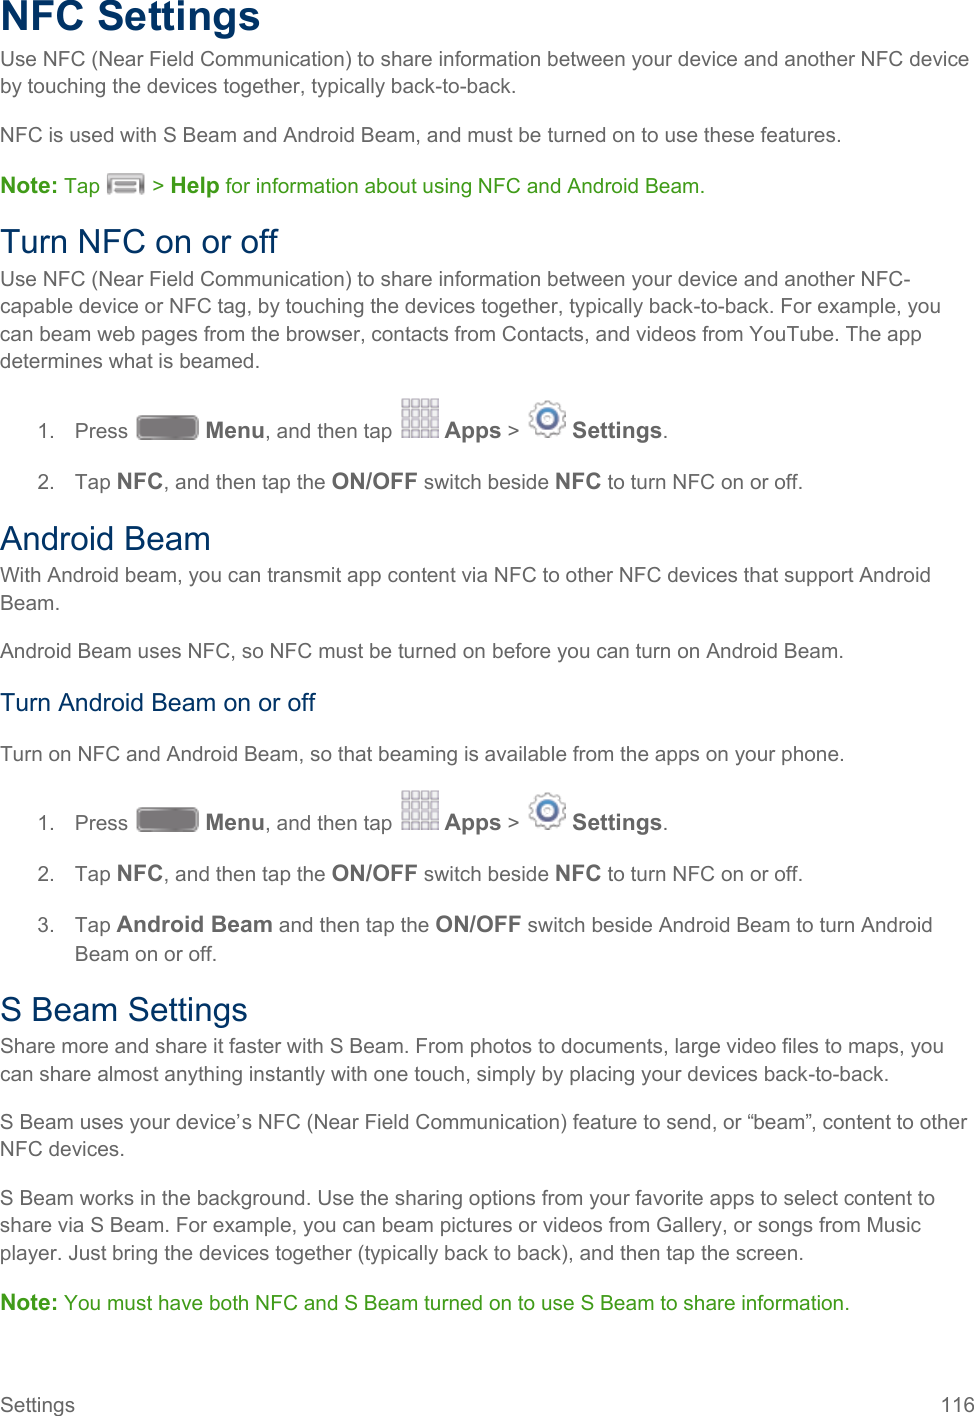  NFC Settings Use NFC (Near Field Communication) to share information between your device and another NFC device by touching the devices together, typically back-to-back. NFC is used with S Beam and Android Beam, and must be turned on to use these features. Note: Tap   &gt; Help for information about using NFC and Android Beam. Turn NFC on or off Use NFC (Near Field Communication) to share information between your device and another NFC-capable device or NFC tag, by touching the devices together, typically back-to-back. For example, you can beam web pages from the browser, contacts from Contacts, and videos from YouTube. The app determines what is beamed. 1. Press   Menu, and then tap   Apps &gt;   Settings.  2. Tap NFC, and then tap the ON/OFF switch beside NFC to turn NFC on or off. Android Beam With Android beam, you can transmit app content via NFC to other NFC devices that support Android Beam. Android Beam uses NFC, so NFC must be turned on before you can turn on Android Beam. Turn Android Beam on or off Turn on NFC and Android Beam, so that beaming is available from the apps on your phone. 1. Press   Menu, and then tap   Apps &gt;   Settings.  2. Tap NFC, and then tap the ON/OFF switch beside NFC to turn NFC on or off.  3. Tap Android Beam and then tap the ON/OFF switch beside Android Beam to turn Android Beam on or off. S Beam Settings Share more and share it faster with S Beam. From photos to documents, large video files to maps, you can share almost anything instantly with one touch, simply by placing your devices back-to-back. S Beam uses your device’s NFC (Near Field Communication) feature to send, or “beam”, content to other NFC devices. S Beam works in the background. Use the sharing options from your favorite apps to select content to share via S Beam. For example, you can beam pictures or videos from Gallery, or songs from Music player. Just bring the devices together (typically back to back), and then tap the screen. Note: You must have both NFC and S Beam turned on to use S Beam to share information. Settings 116   